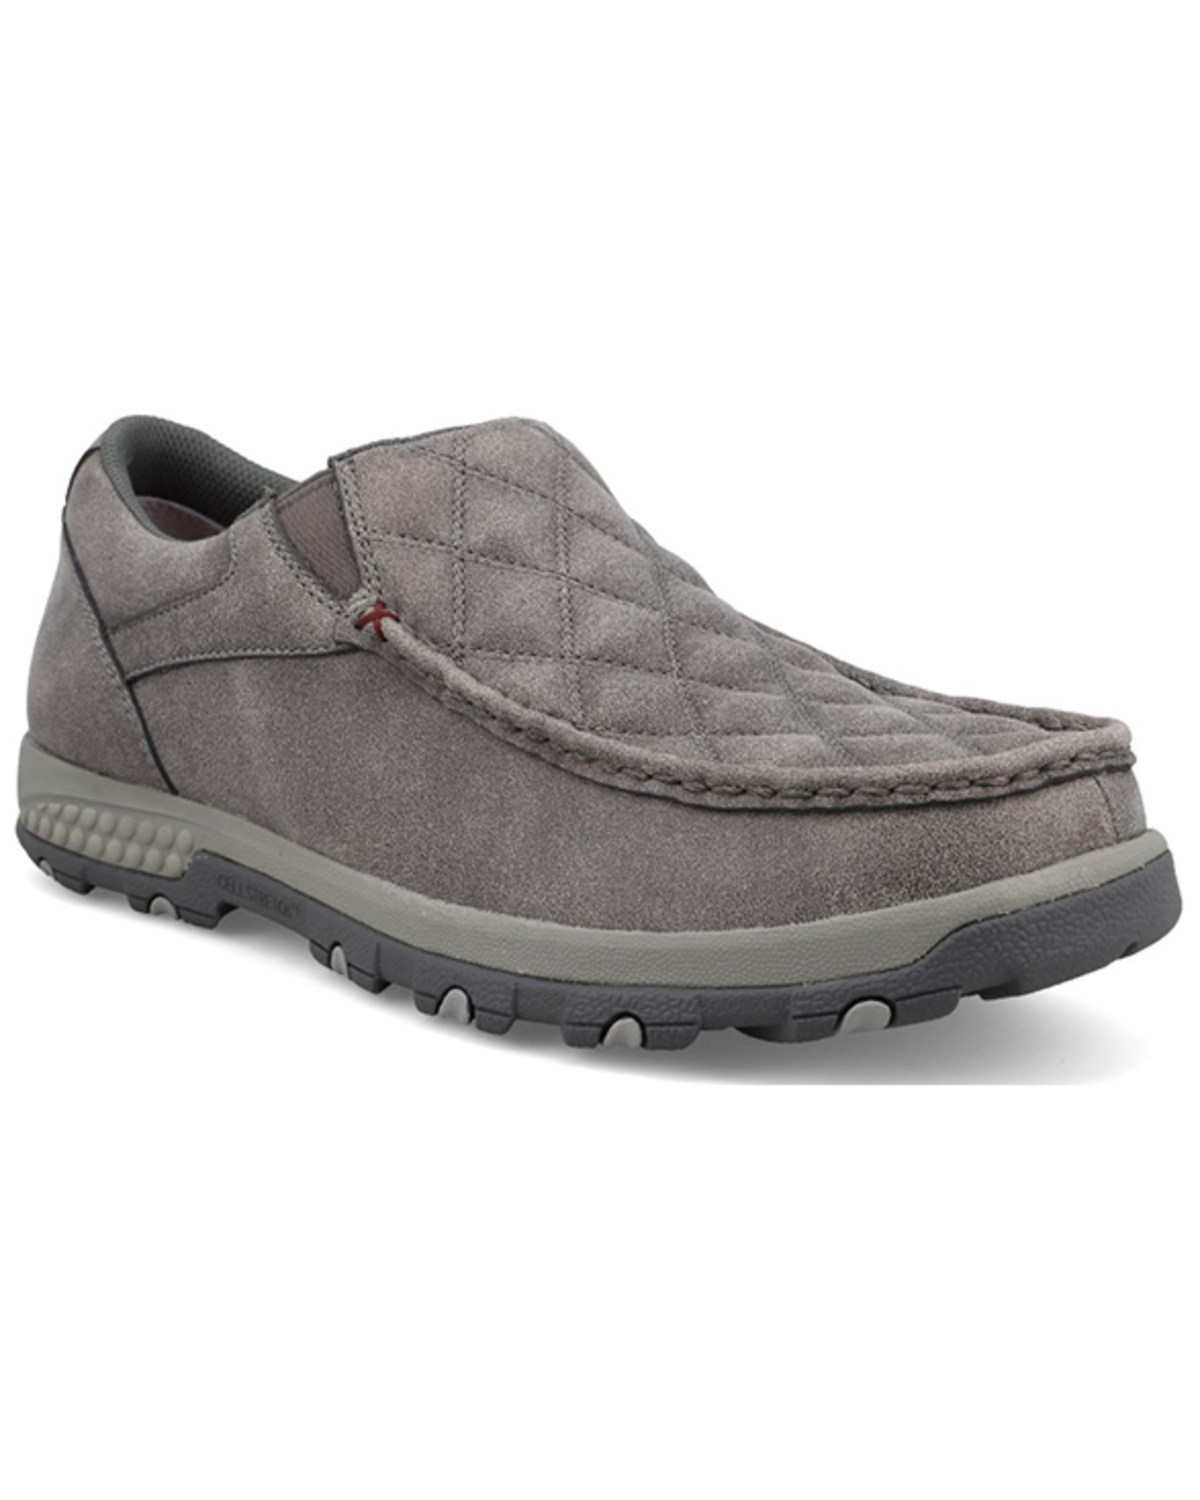 Twisted X Men's Slip-On Driving Casual Shoe - Moc Toe